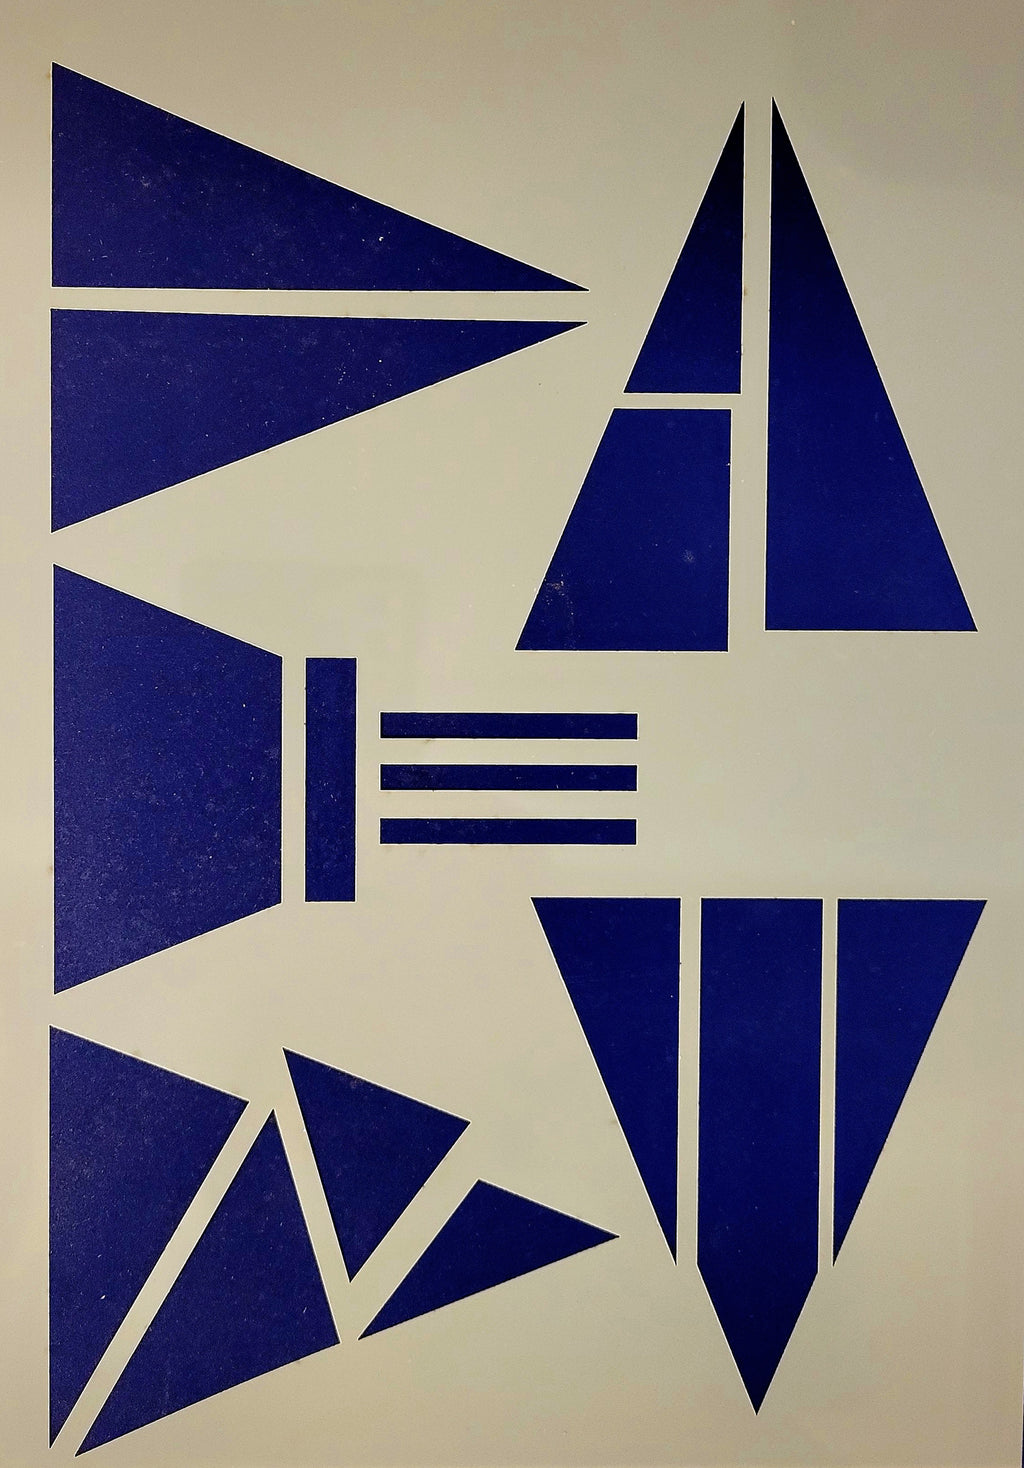 Triangle Stencils by Paola Bassan